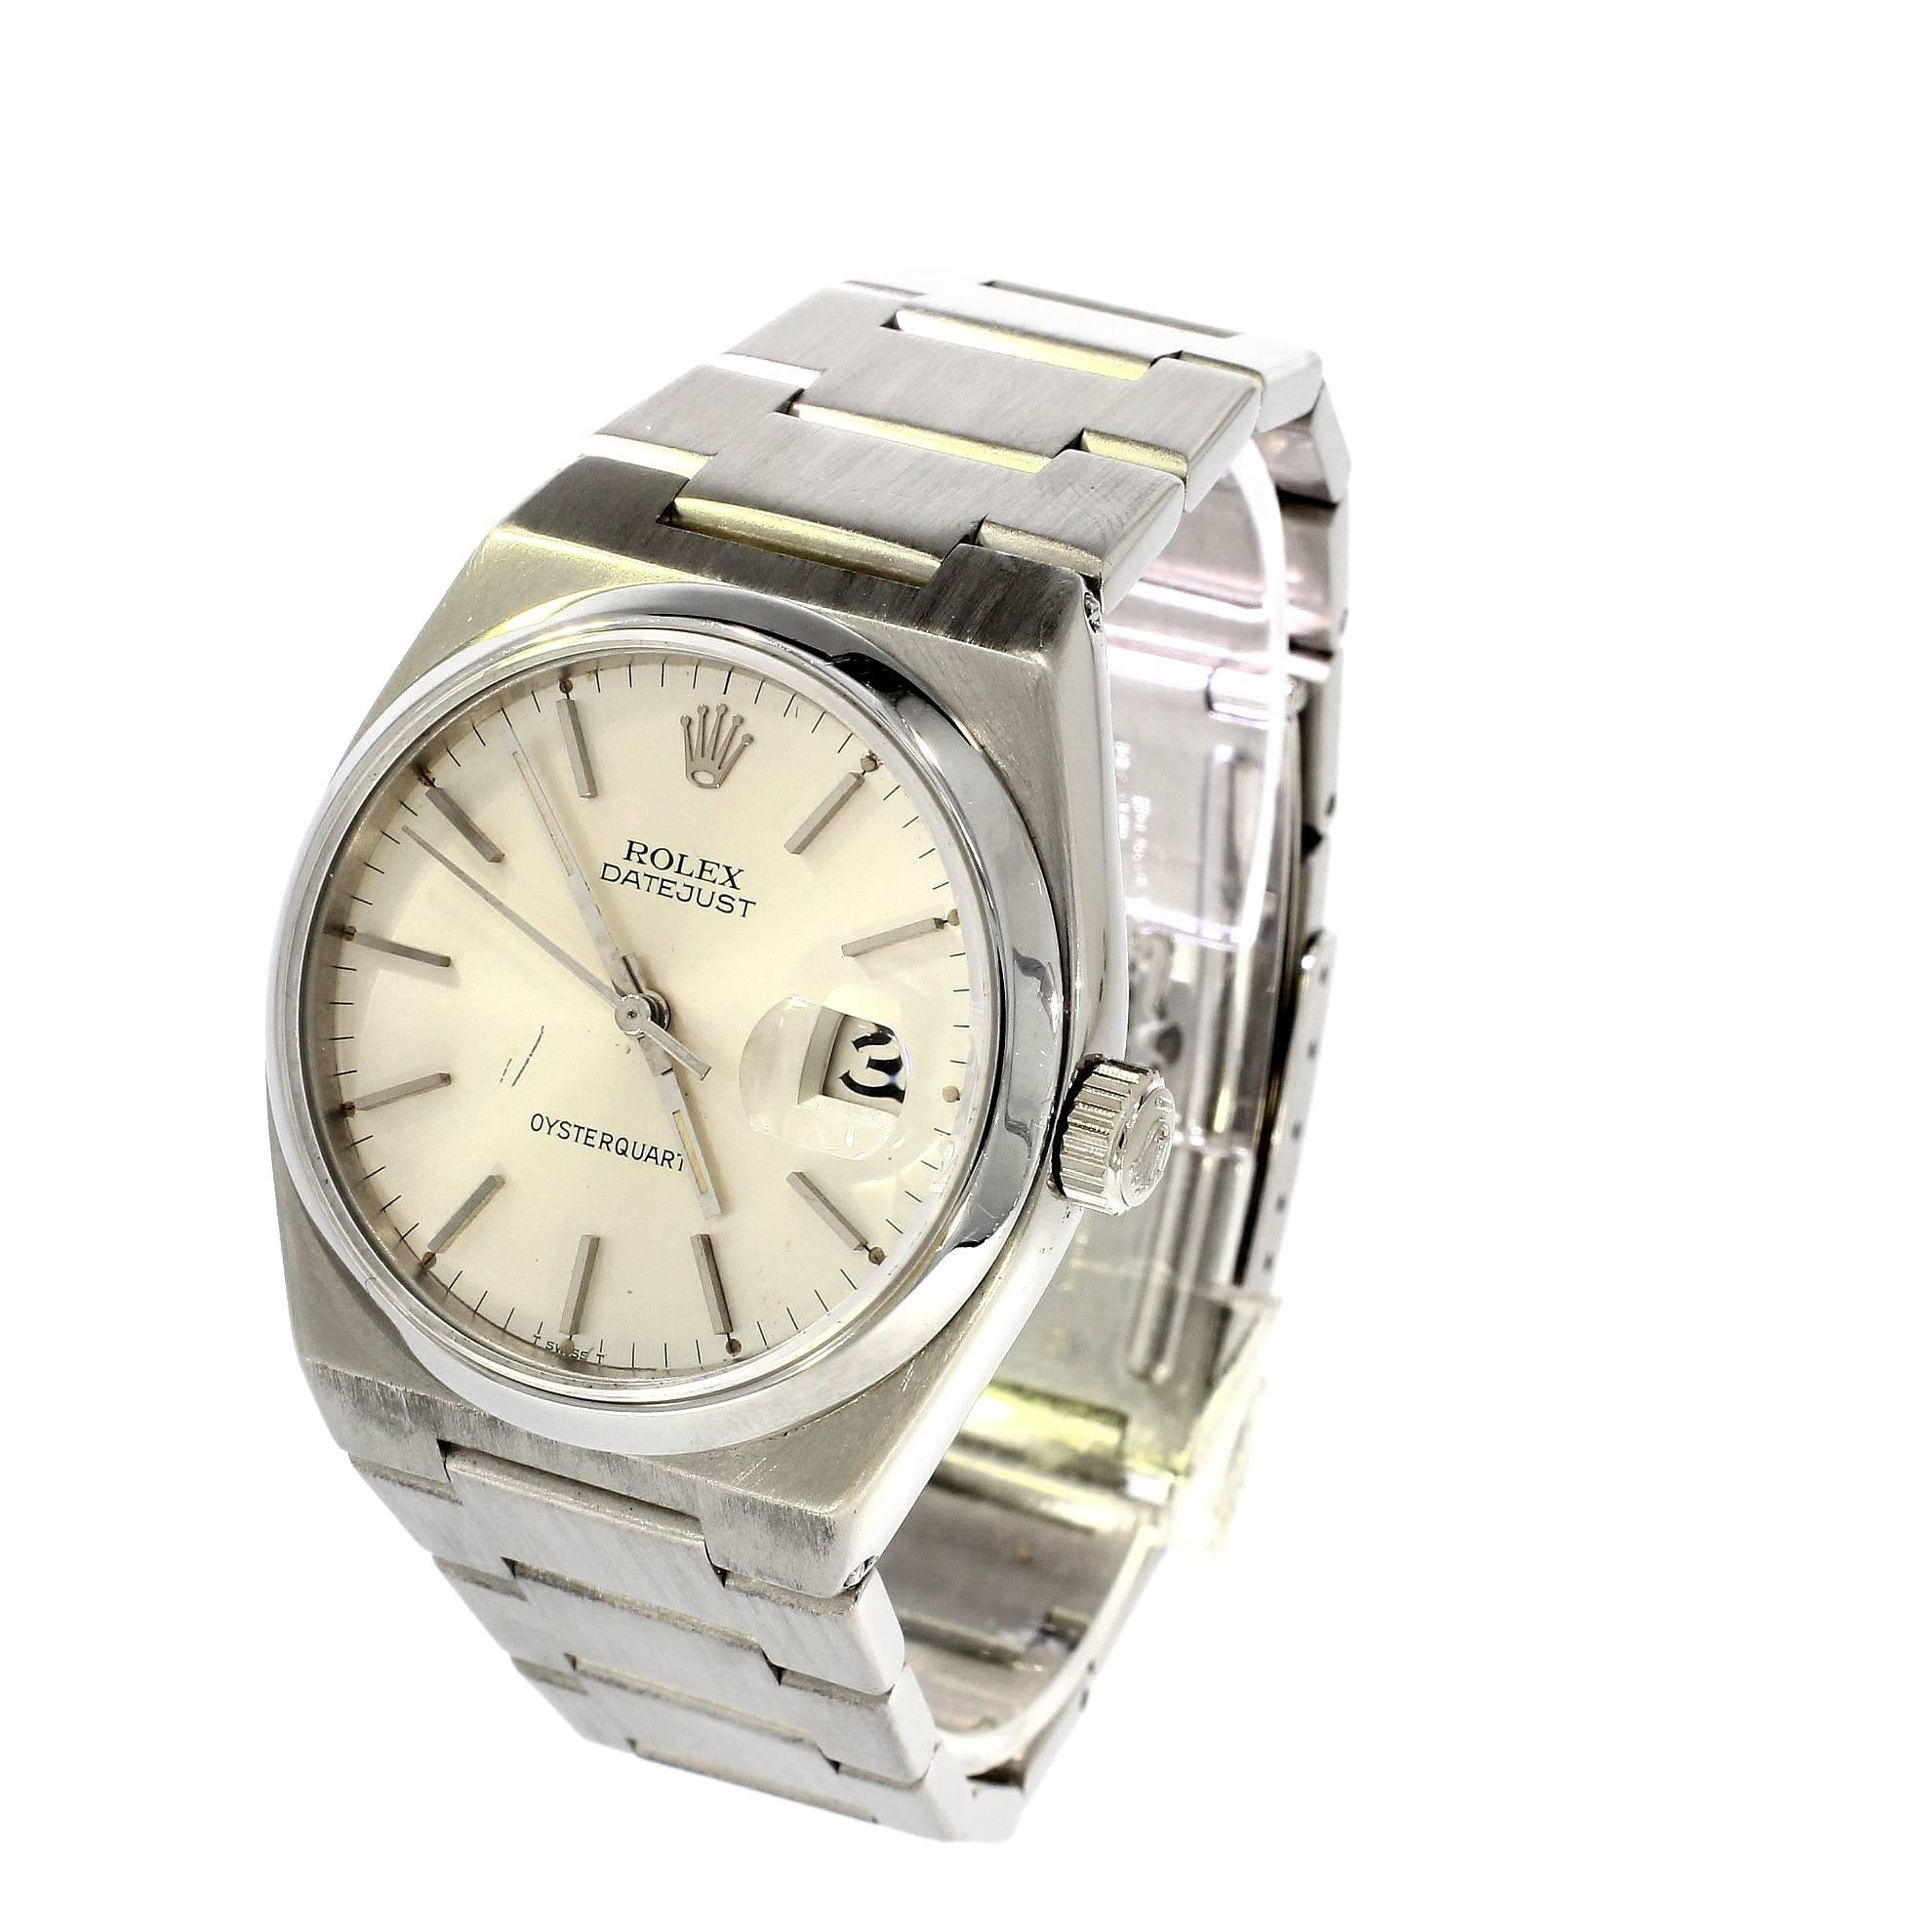 This Rolex has undergone a thorough inspection and service to ensure all aspects of the watch are as they should be to meet our high standards for sale. It has also been referenced against records and registers to help determine a clean history and